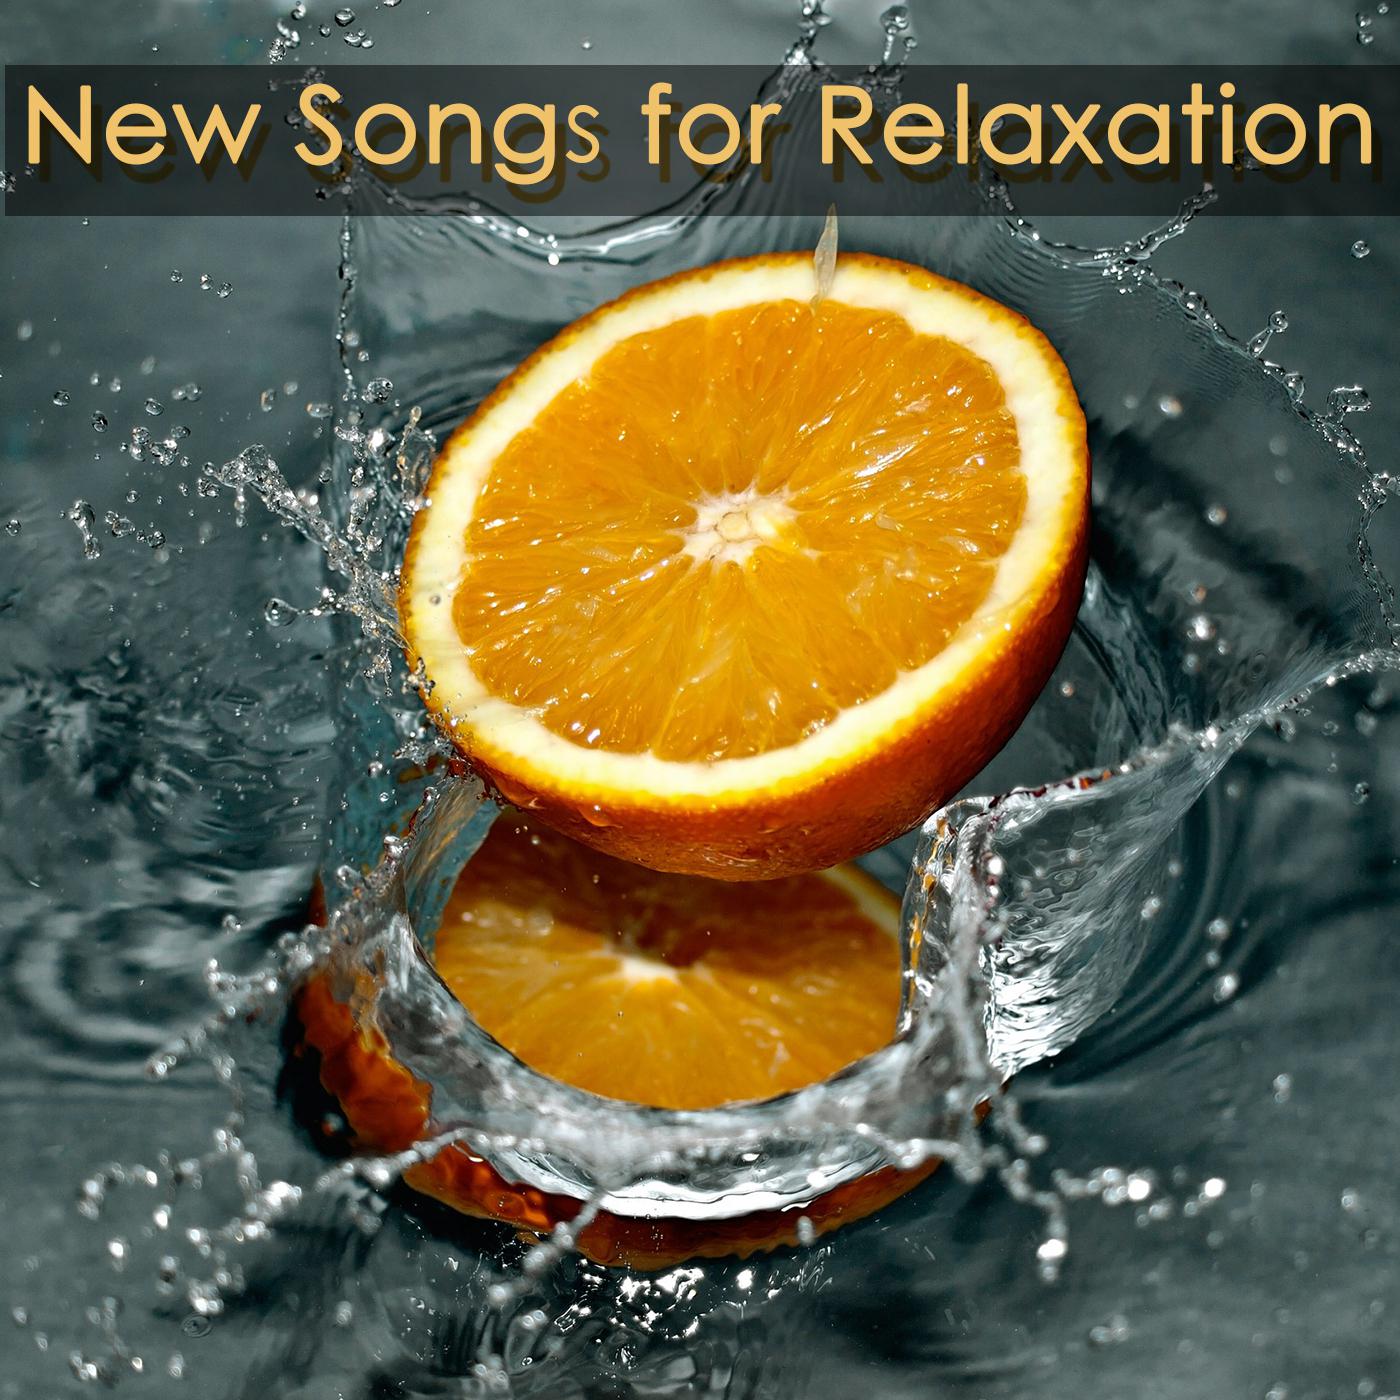 New Songs for Relaxation  Emotional Healing Music for Relaxation Meditation  Sleeping